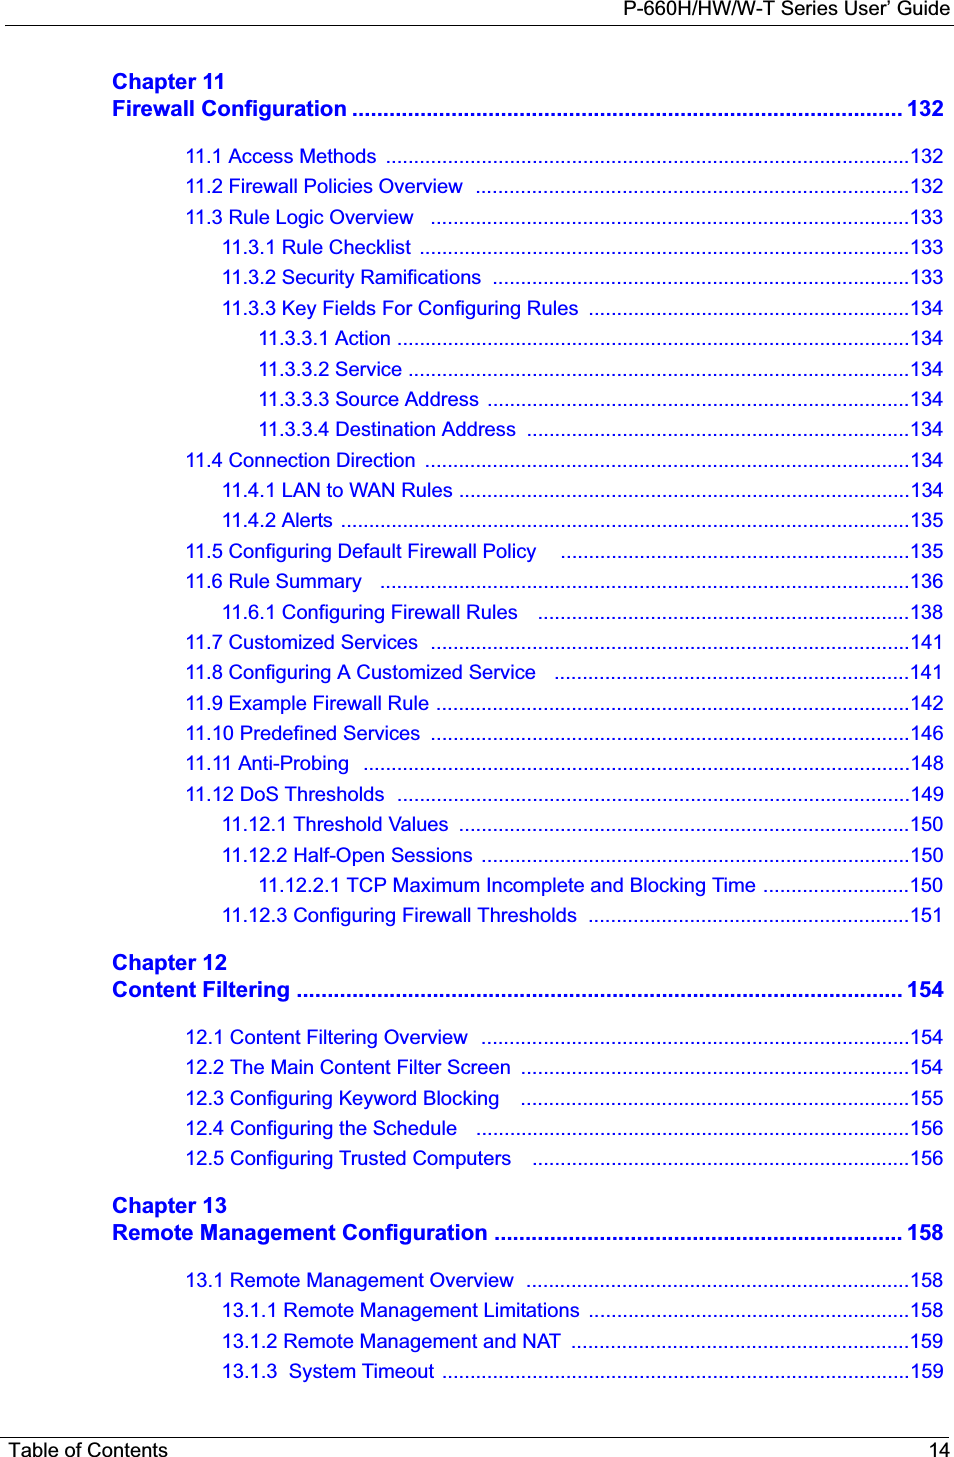 P-660H/HW/W-T Series User’ GuideTable of Contents 14Chapter 11Firewall Configuration ......................................................................................... 13211.1 Access Methods  .............................................................................................13211.2 Firewall Policies Overview  .............................................................................13211.3 Rule Logic Overview   .....................................................................................13311.3.1 Rule Checklist  .......................................................................................13311.3.2 Security Ramifications  ..........................................................................13311.3.3 Key Fields For Configuring Rules  .........................................................13411.3.3.1 Action ...........................................................................................13411.3.3.2 Service .........................................................................................13411.3.3.3 Source Address  ...........................................................................13411.3.3.4 Destination Address  ....................................................................13411.4 Connection Direction  ......................................................................................13411.4.1 LAN to WAN Rules ................................................................................13411.4.2 Alerts .....................................................................................................13511.5 Configuring Default Firewall Policy    ..............................................................13511.6 Rule Summary   ..............................................................................................13611.6.1 Configuring Firewall Rules    ..................................................................13811.7 Customized Services  .....................................................................................14111.8 Configuring A Customized Service   ...............................................................14111.9 Example Firewall Rule ....................................................................................14211.10 Predefined Services  .....................................................................................14611.11 Anti-Probing   .................................................................................................14811.12 DoS Thresholds  ...........................................................................................14911.12.1 Threshold Values  ................................................................................15011.12.2 Half-Open Sessions  ............................................................................15011.12.2.1 TCP Maximum Incomplete and Blocking Time ..........................15011.12.3 Configuring Firewall Thresholds  .........................................................151Chapter 12Content Filtering .................................................................................................. 15412.1 Content Filtering Overview  ............................................................................15412.2 The Main Content Filter Screen  .....................................................................15412.3 Configuring Keyword Blocking    .....................................................................15512.4 Configuring the Schedule   .............................................................................15612.5 Configuring Trusted Computers    ...................................................................156Chapter 13Remote Management Configuration .................................................................. 15813.1 Remote Management Overview  ....................................................................15813.1.1 Remote Management Limitations  .........................................................15813.1.2 Remote Management and NAT  ............................................................15913.1.3  System Timeout ...................................................................................159